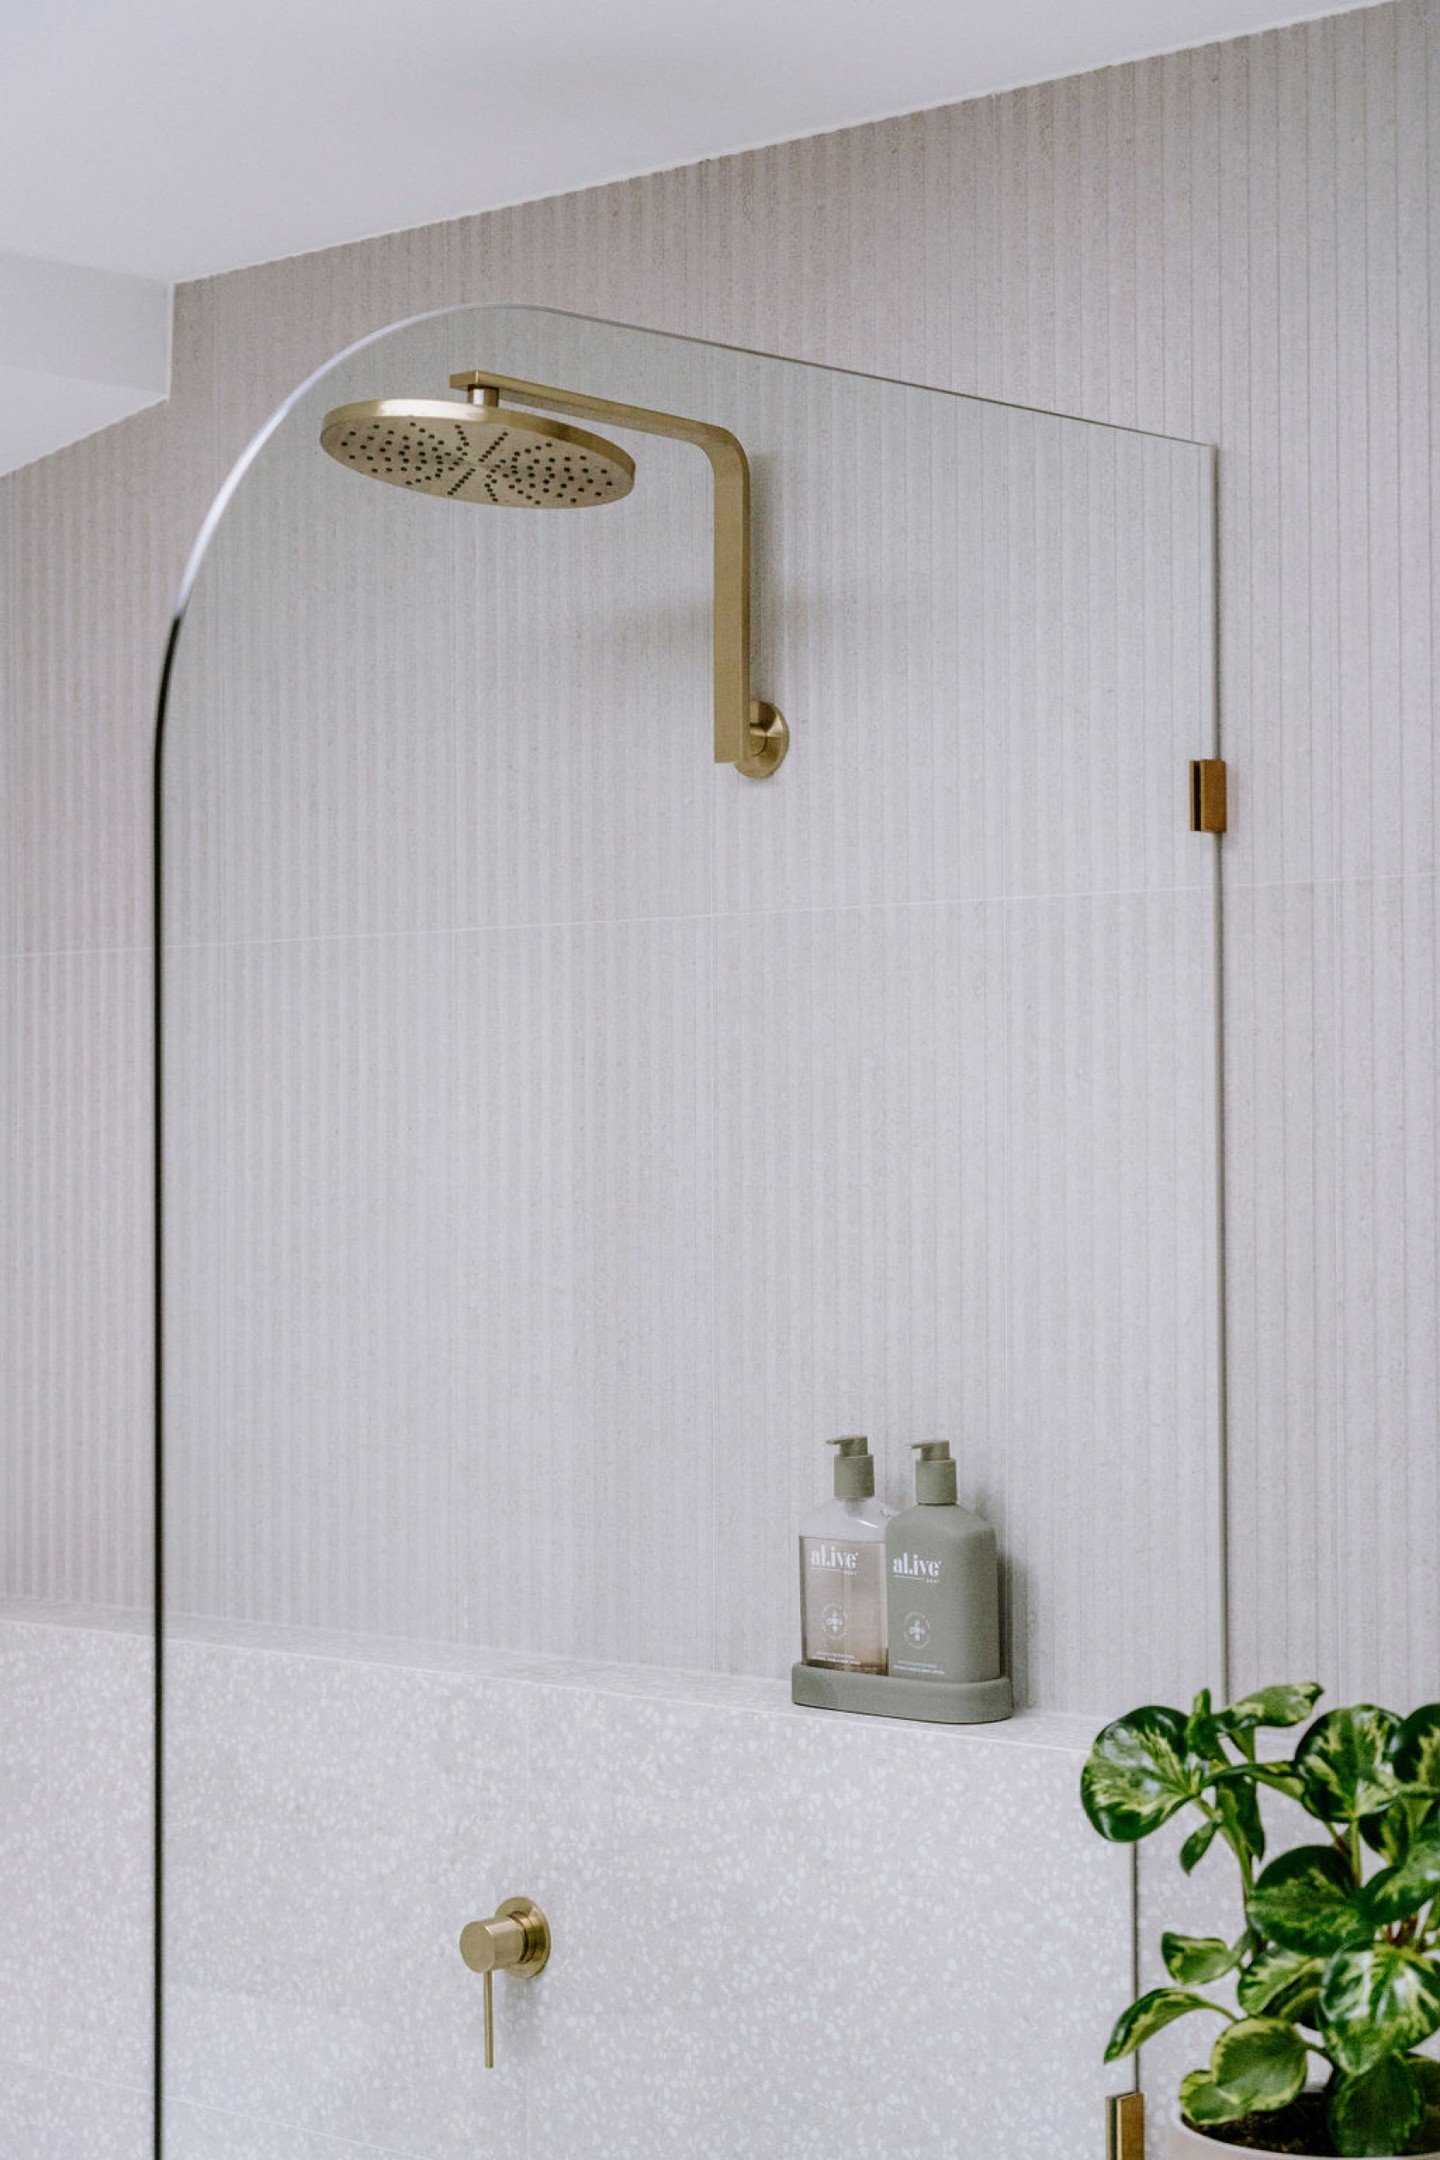 Embrace holistic bathroom design! 5 Practical tips to create a cohesive, inspiring bathroom.

A holistic bathroom design starts with a focus on wellness and relaxation. 

1. Consider positioning elements like the bathtub or shower in a way that maxim